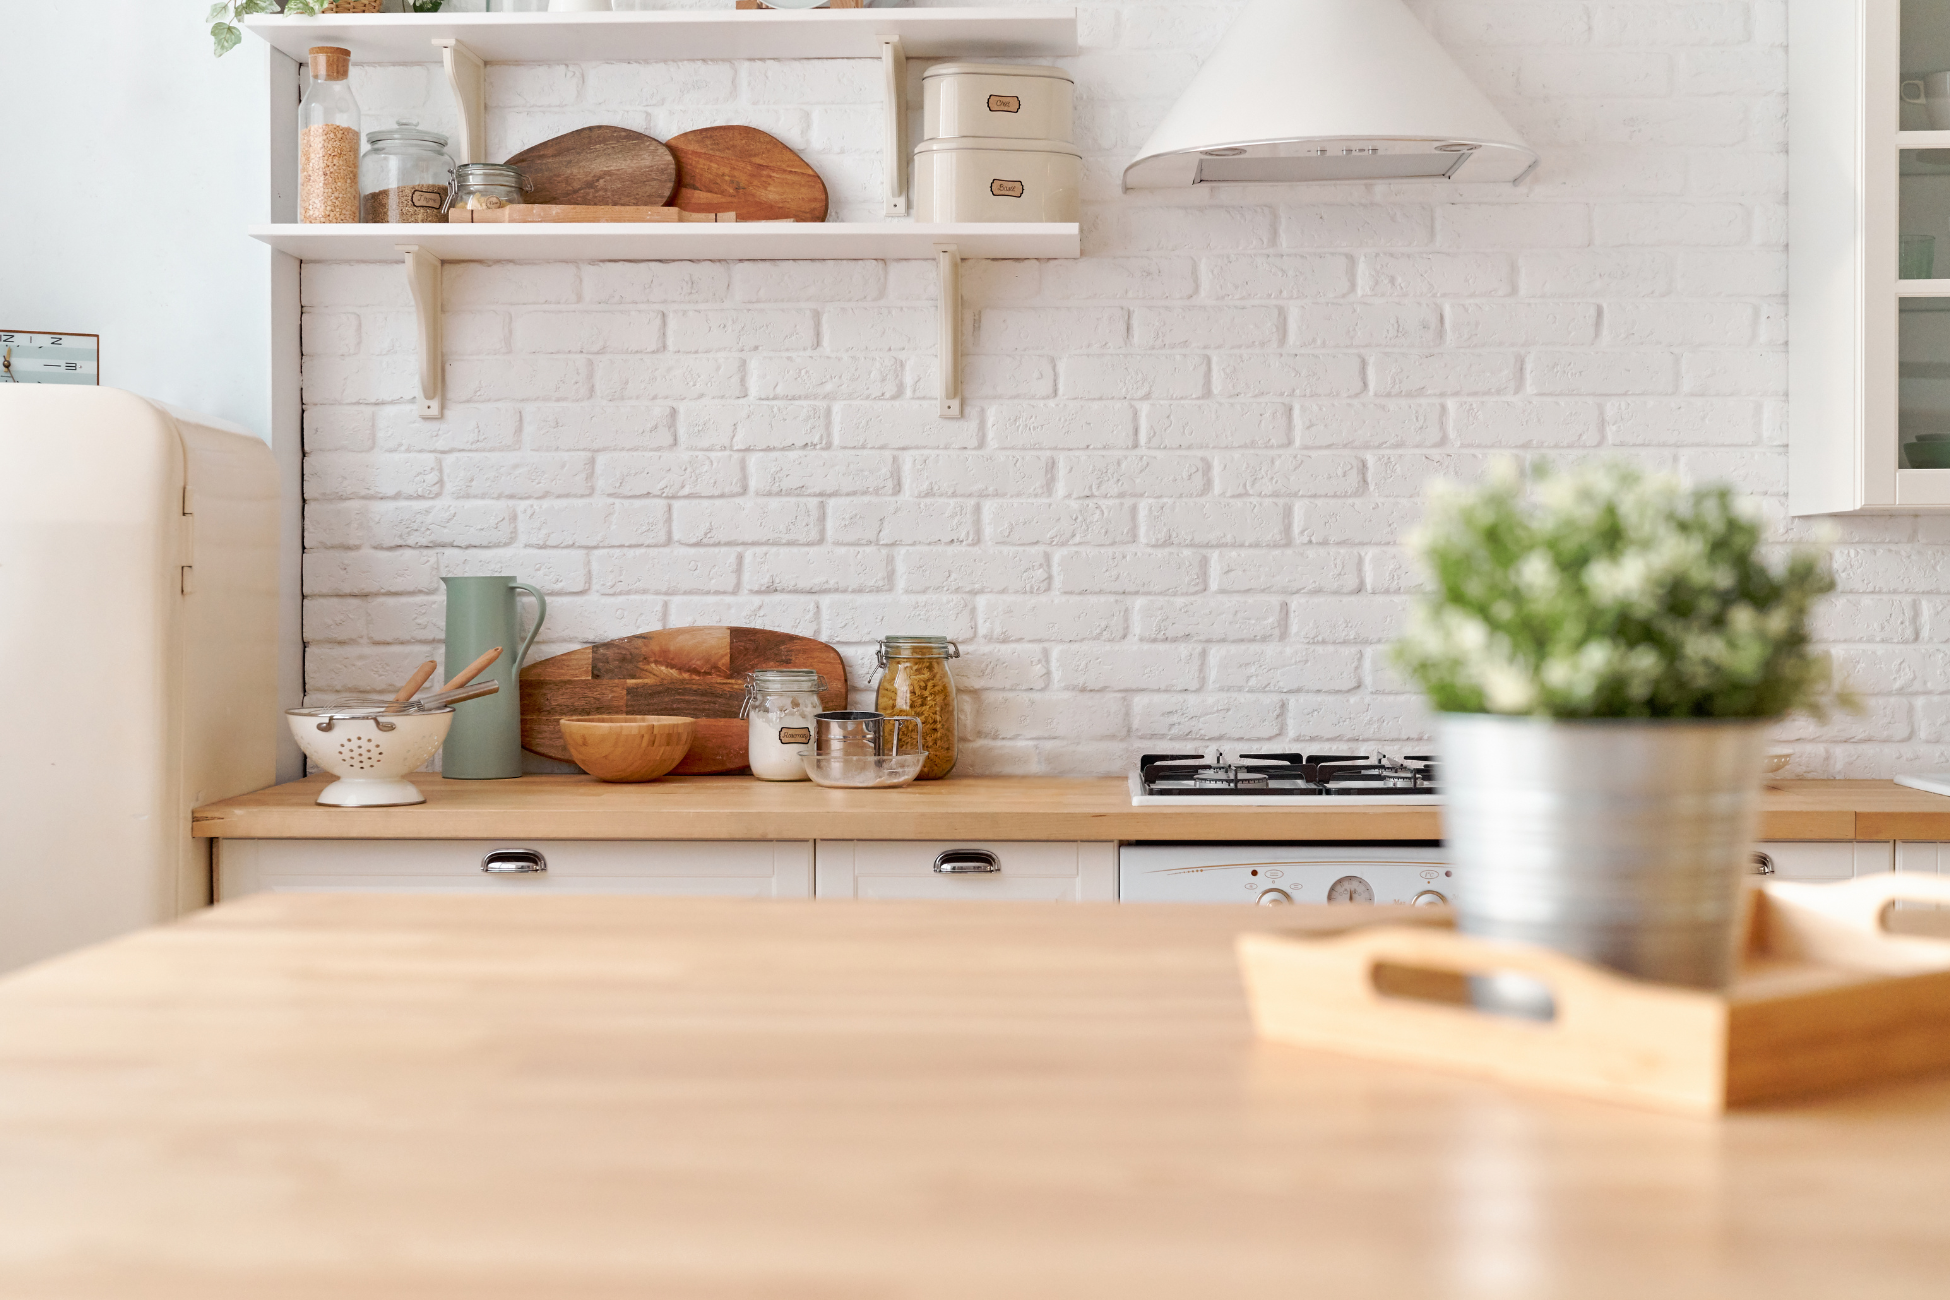 5 Easy Tips for Keeping Your Kitchen Clean and Tidy